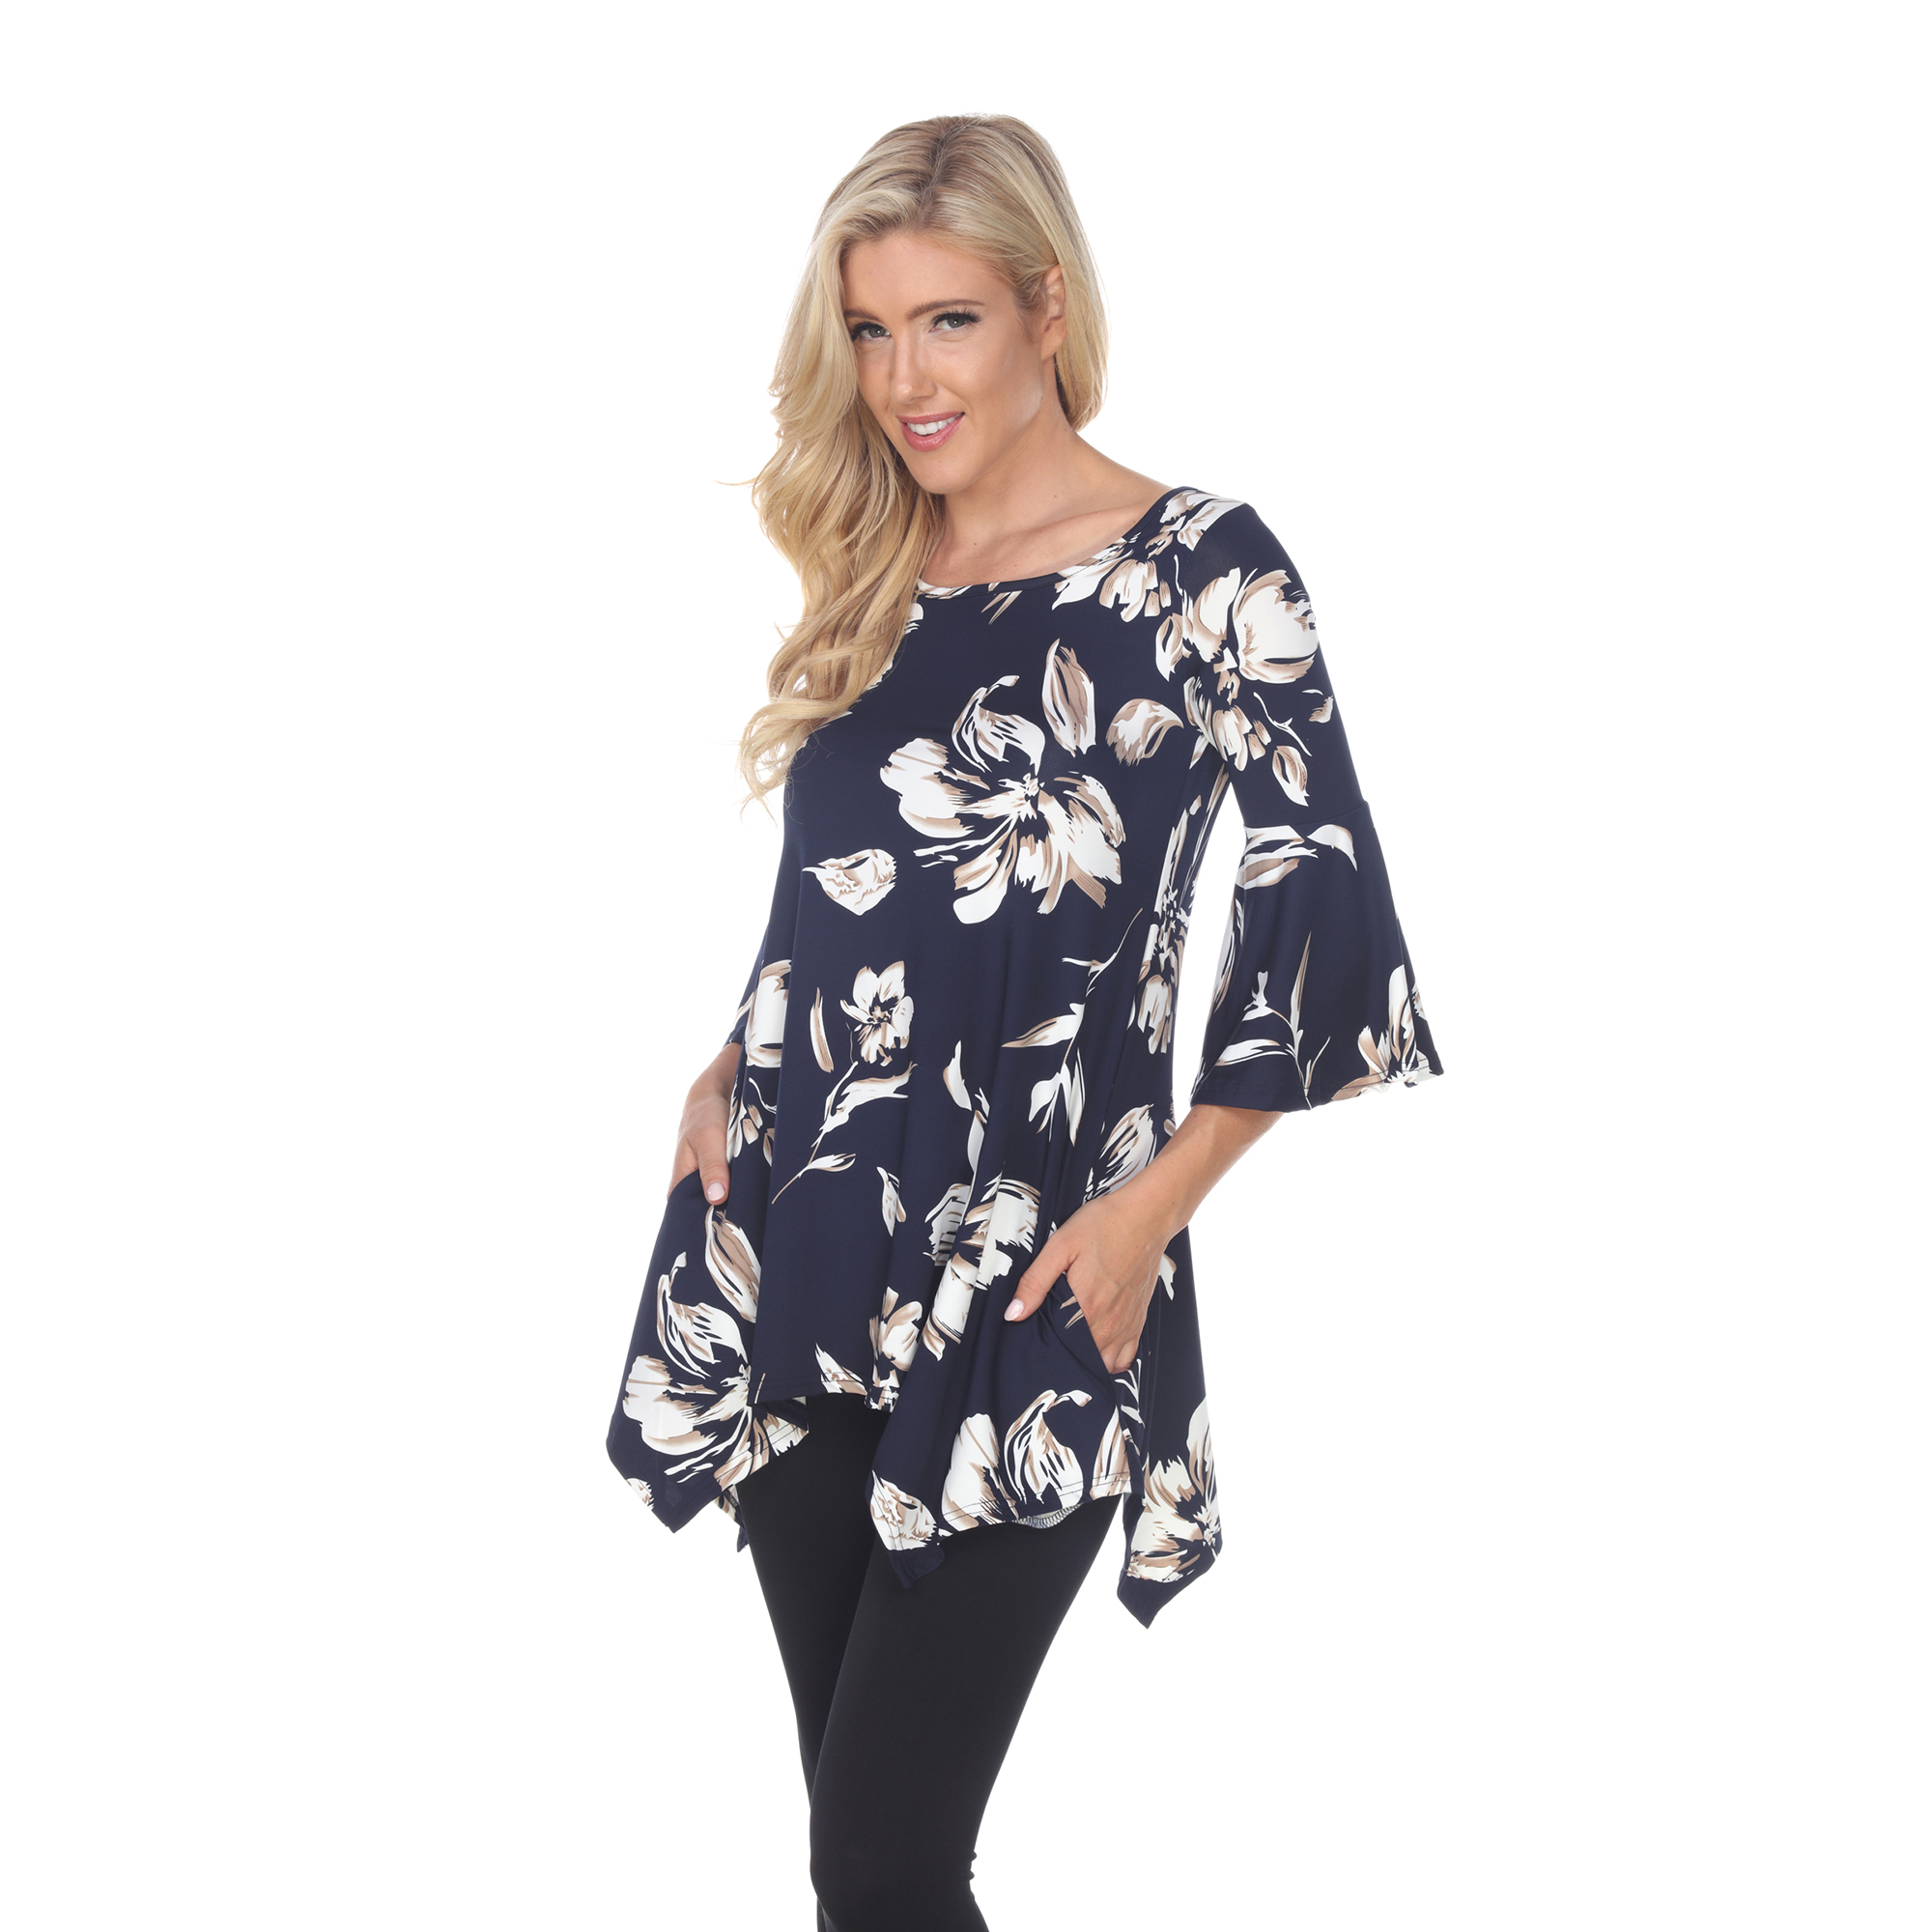 White Mark Women's Floral Print Quarter Sleeve Tunic Top With Pockets - Navy, 4X